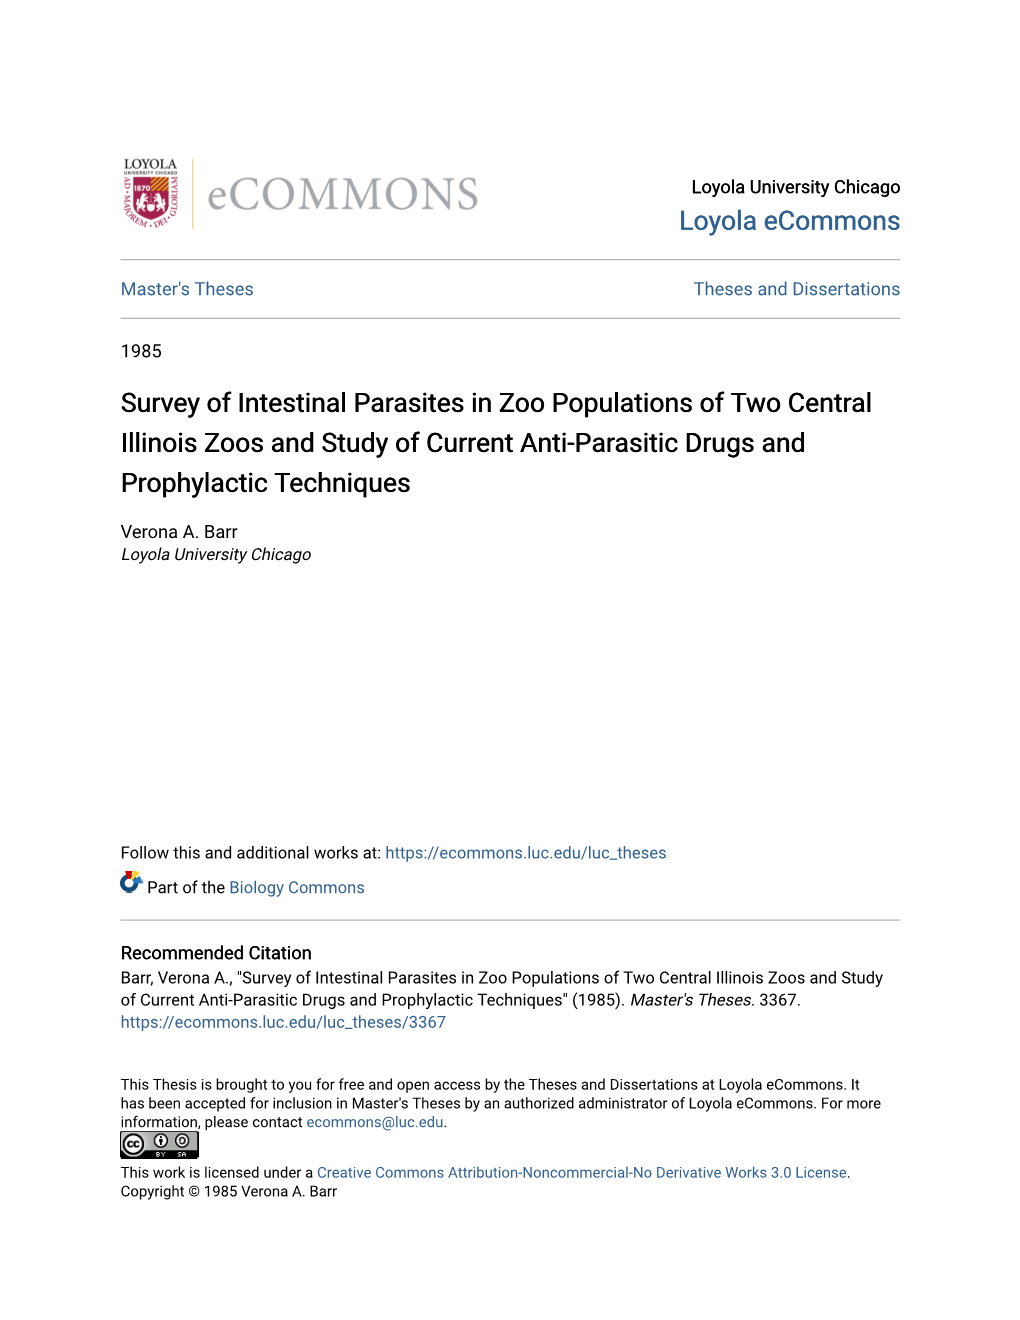 Survey of Intestinal Parasites in Zoo Populations of Two Central Illinois Zoos and Study of Current Anti-Parasitic Drugs and Prophylactic Techniques